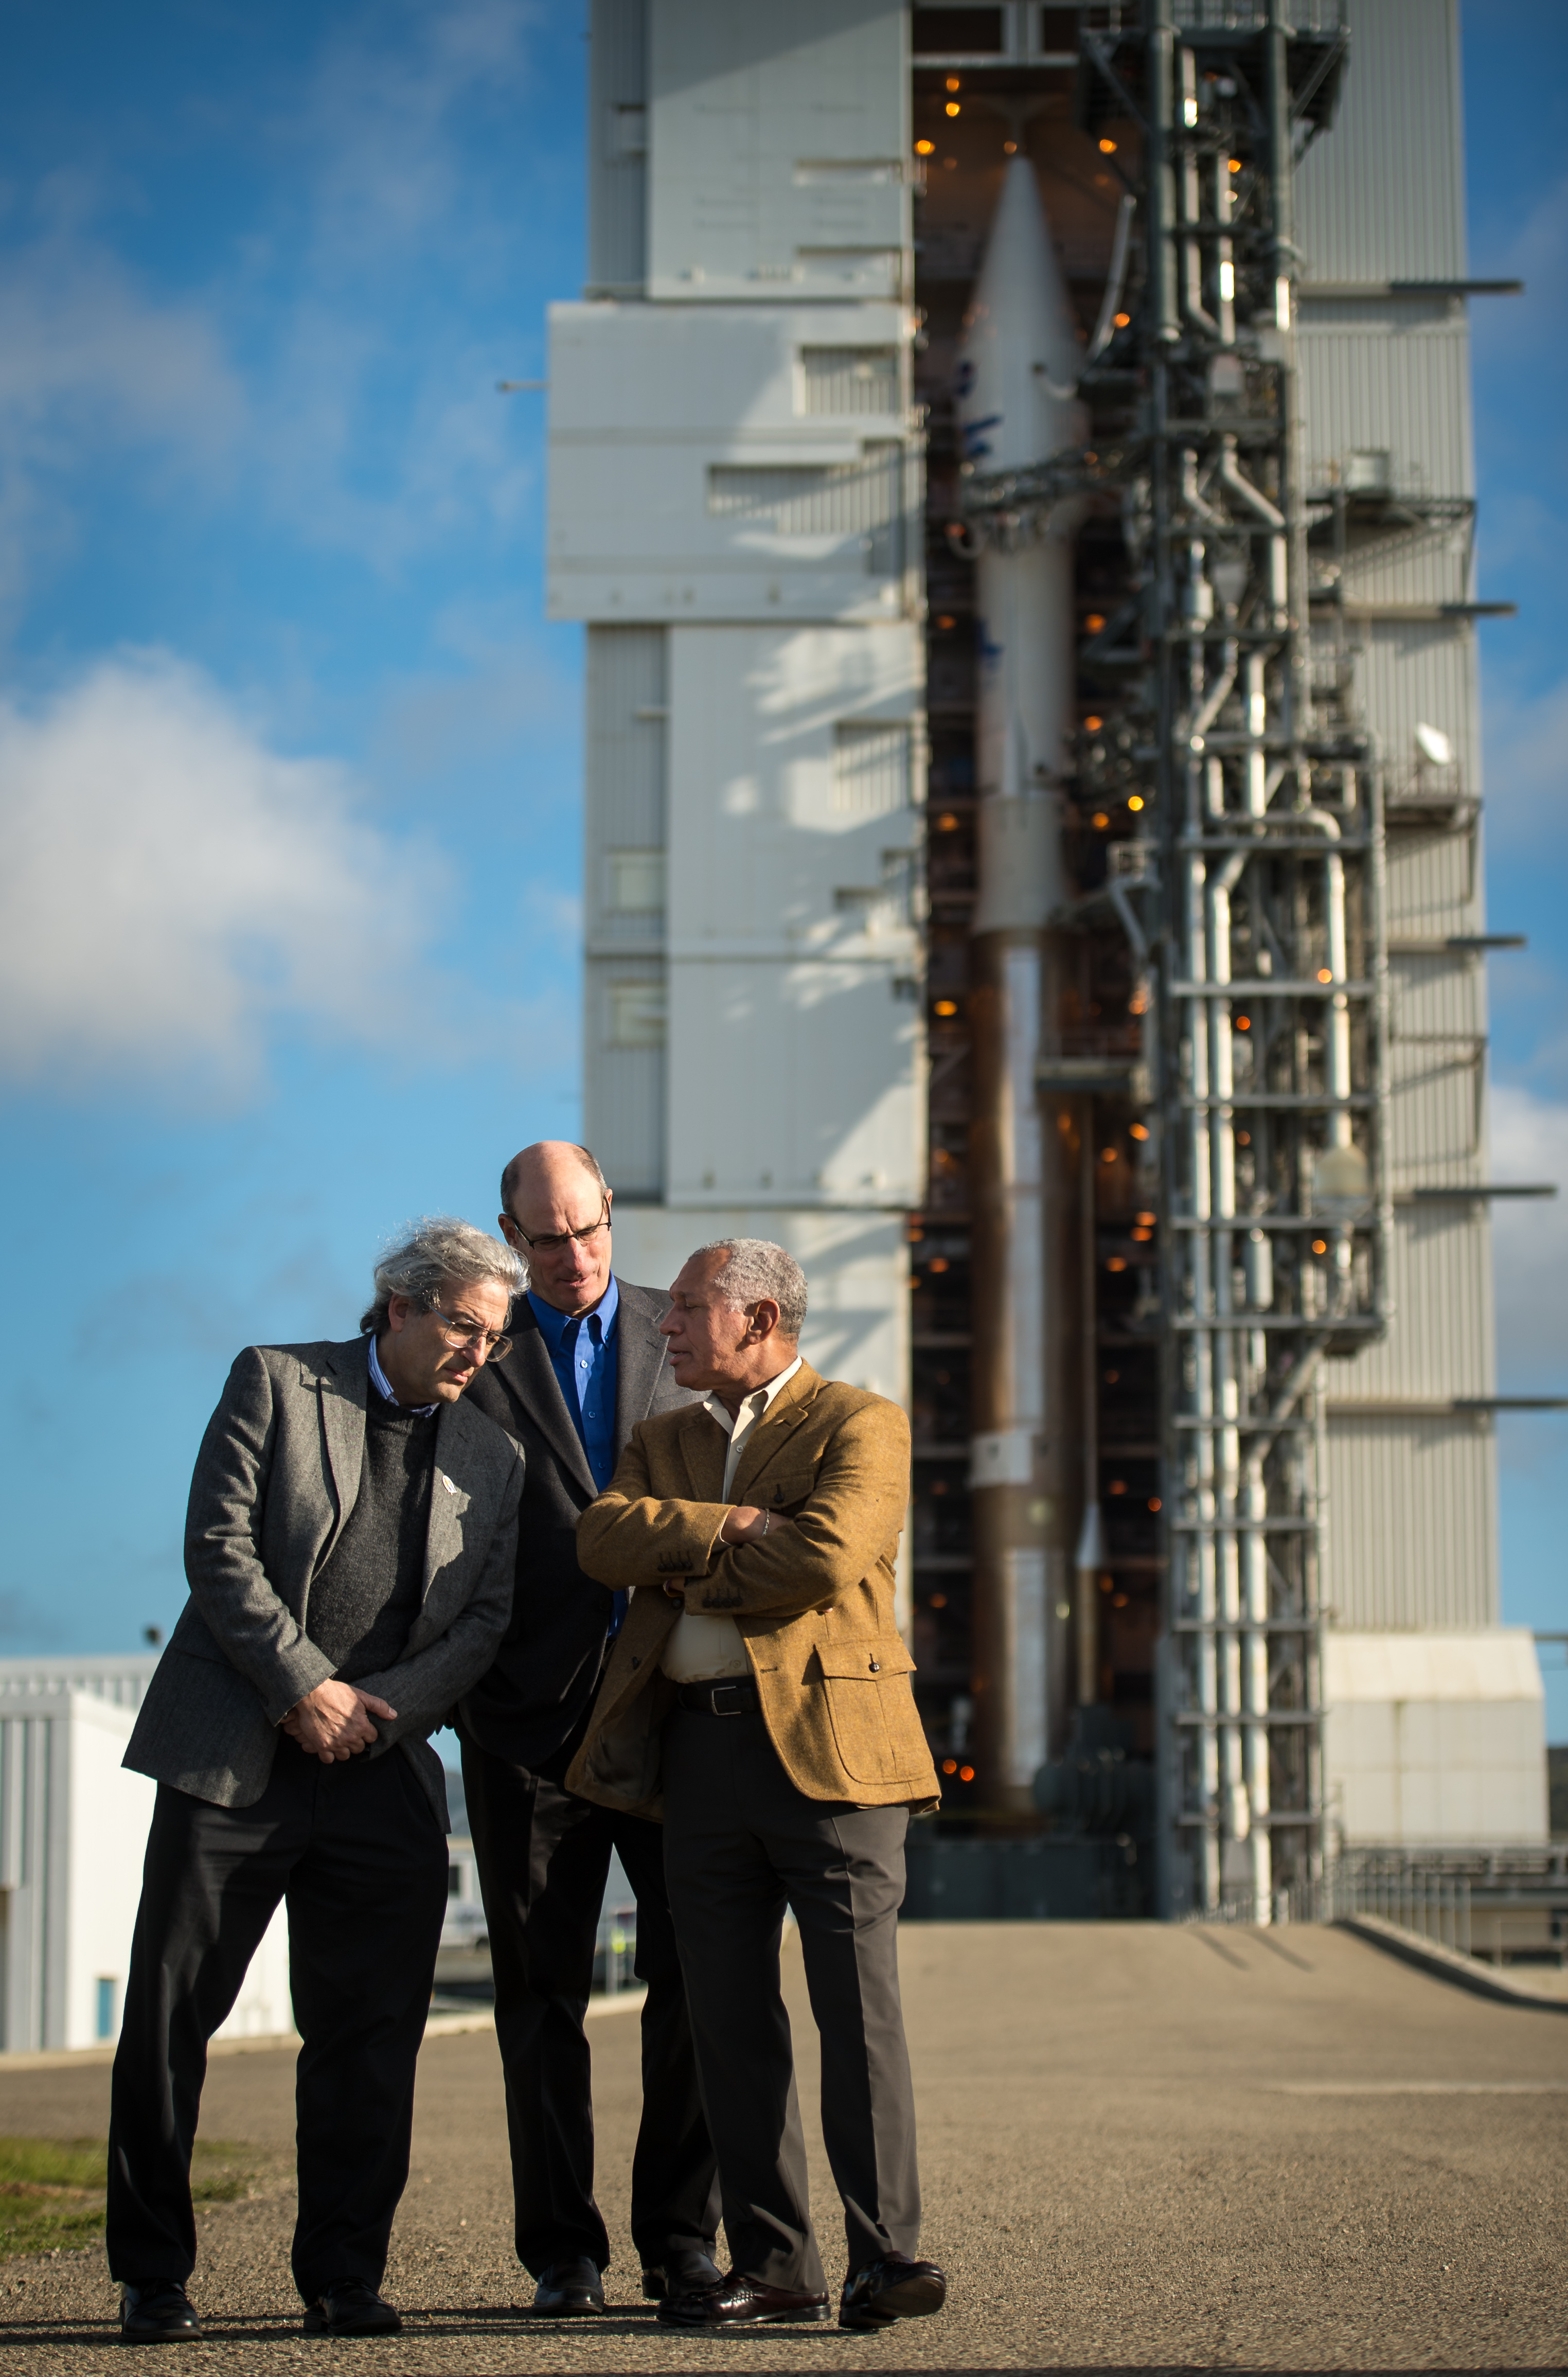 Three men are in close conversation in front of a rocket standing vertical in a hangar.